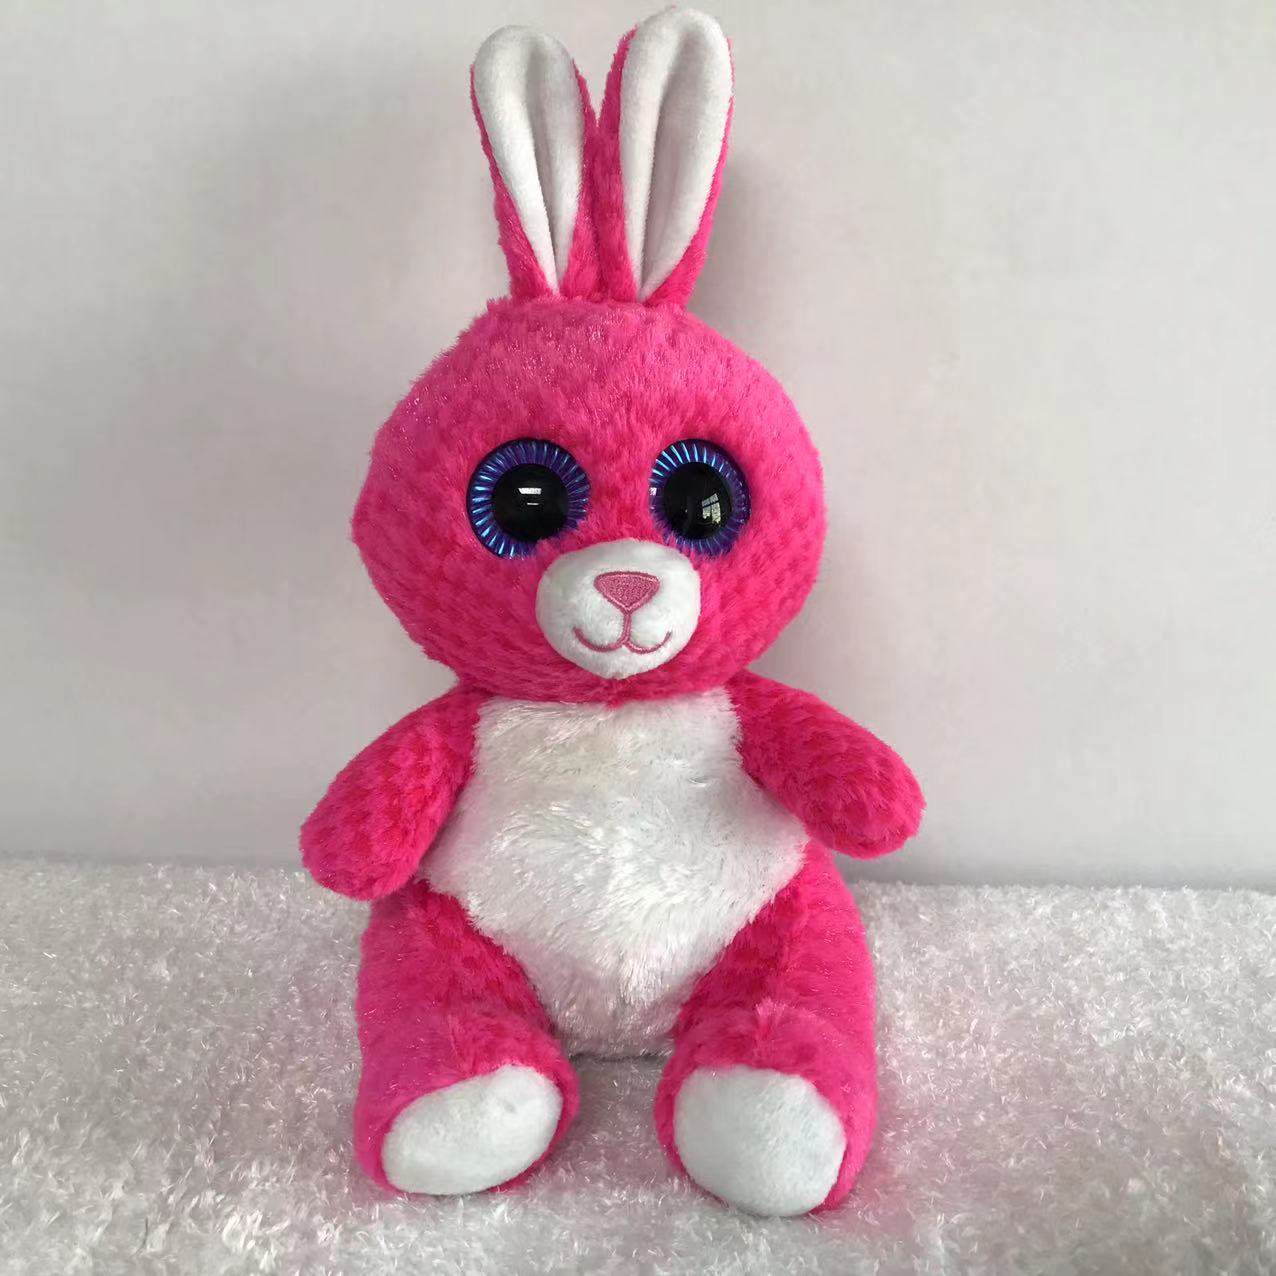 New Easter Kids Gifts Stuffed Animal Cute With Long Ear Soft Toy Stuffed Plush Bunny Rabbit